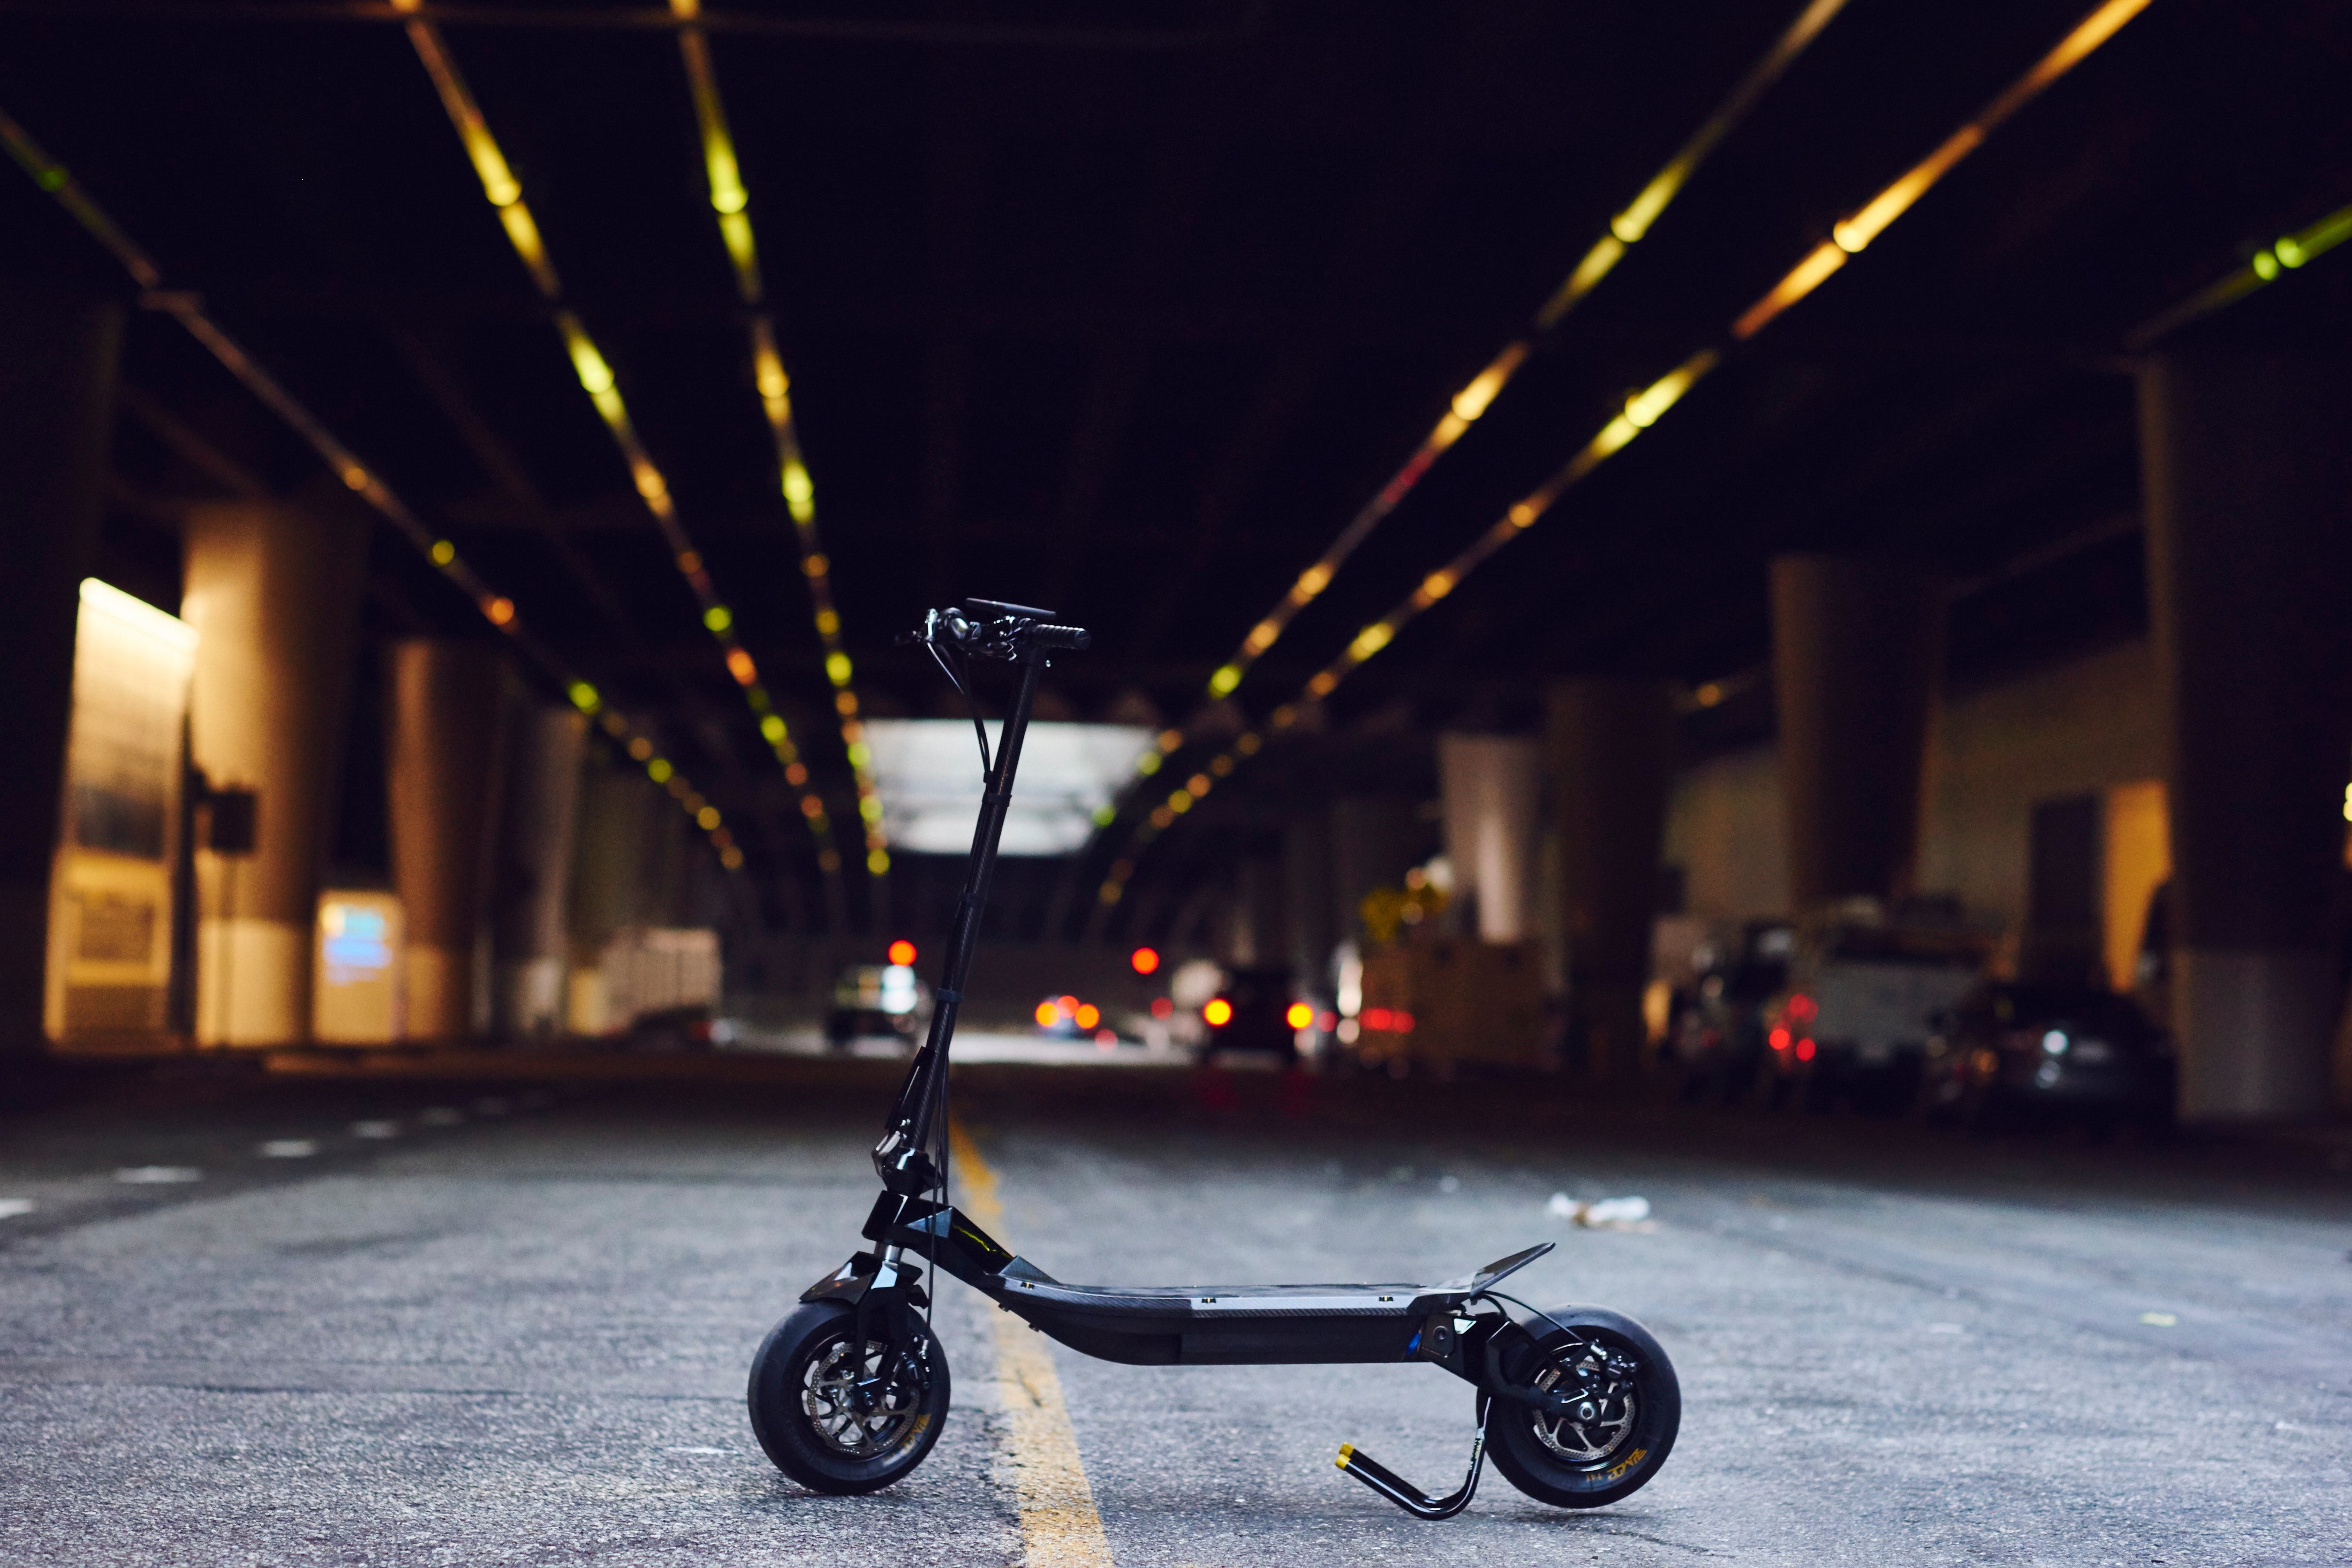 Most Exciting New E-Scooter in 2018